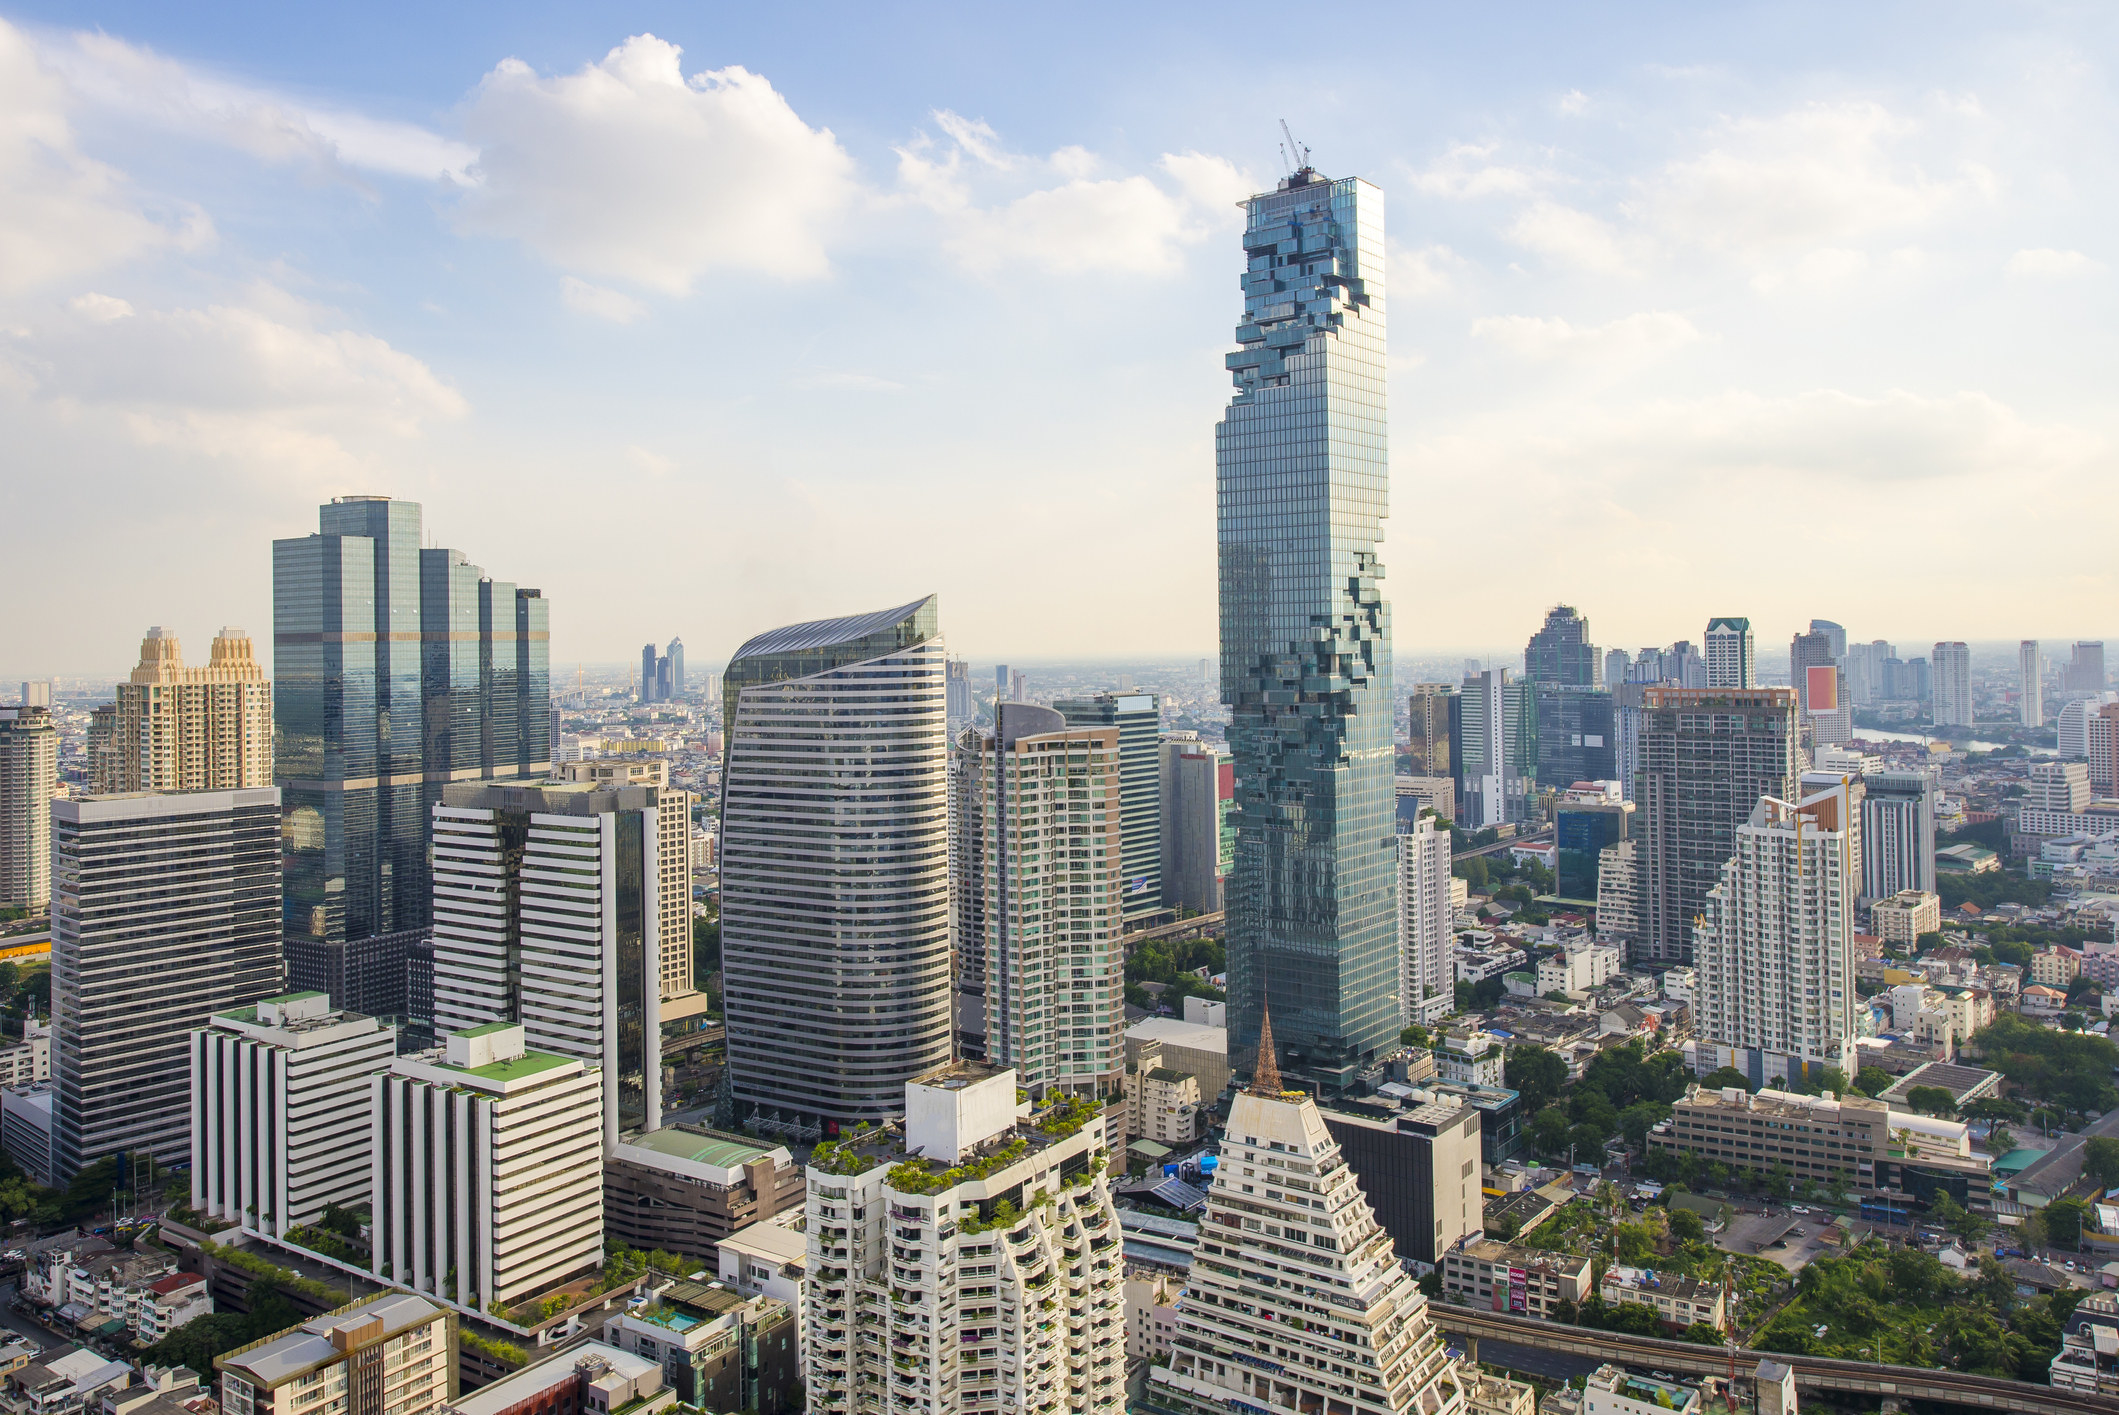 Skyline of Bangkok with the tallest building